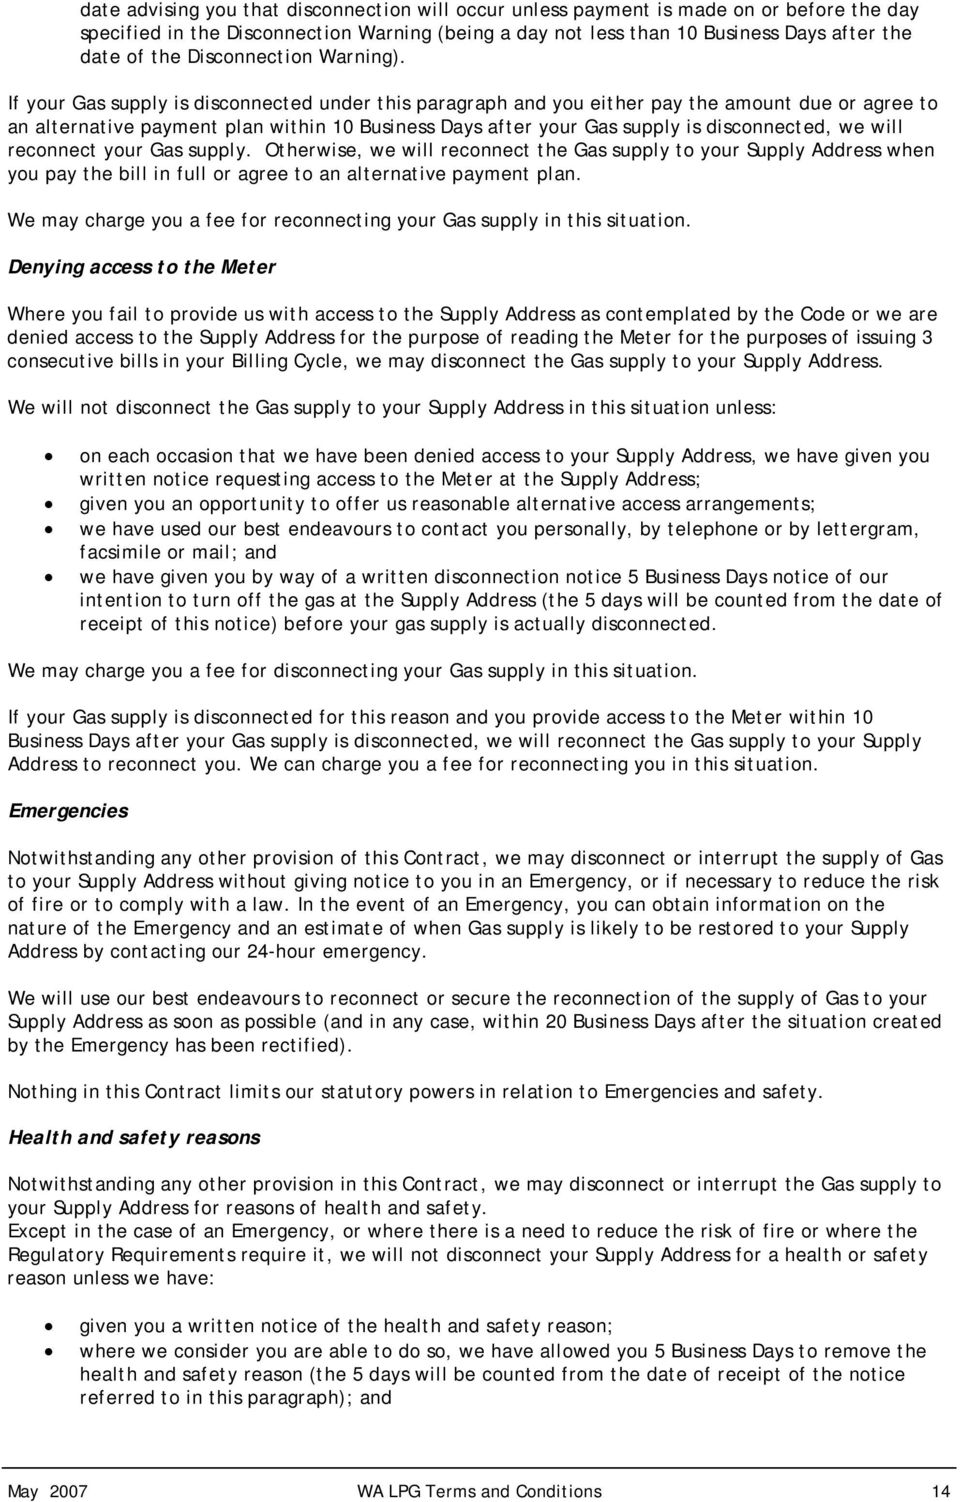 If your Gas supply is disconnected under this paragraph and you either pay the amount due or agree to an alternative payment plan within 10 Business Days after your Gas supply is disconnected, we